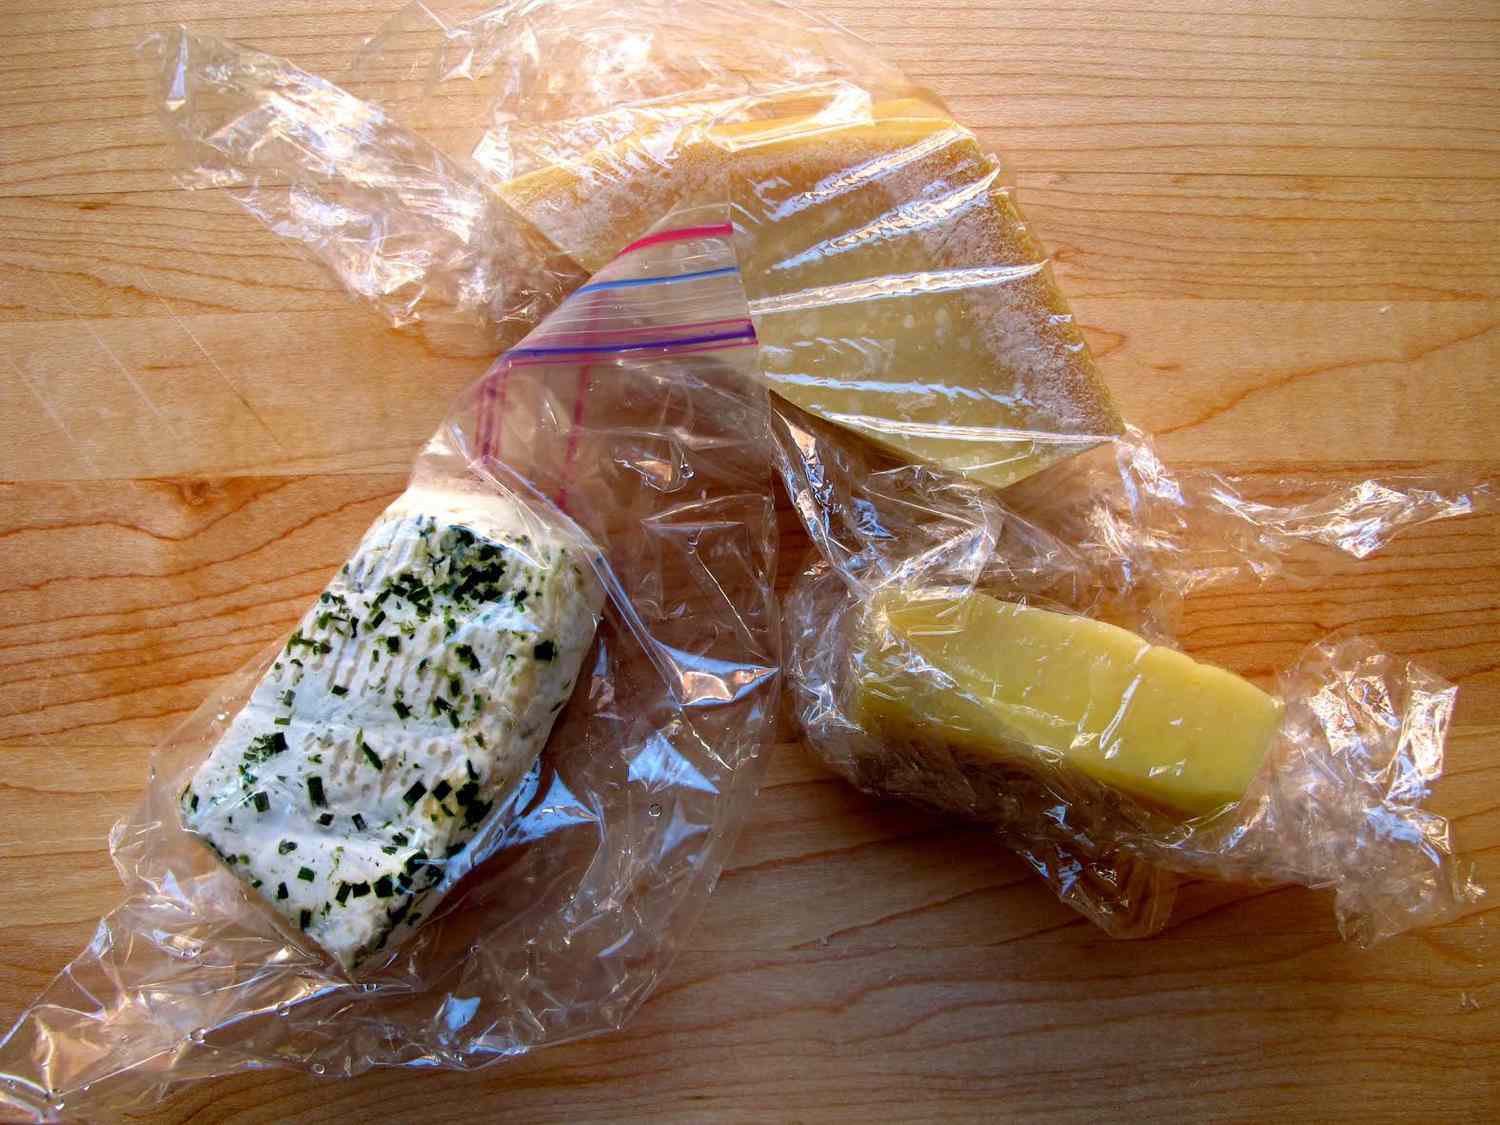 Cheese Wrapped in Plastic